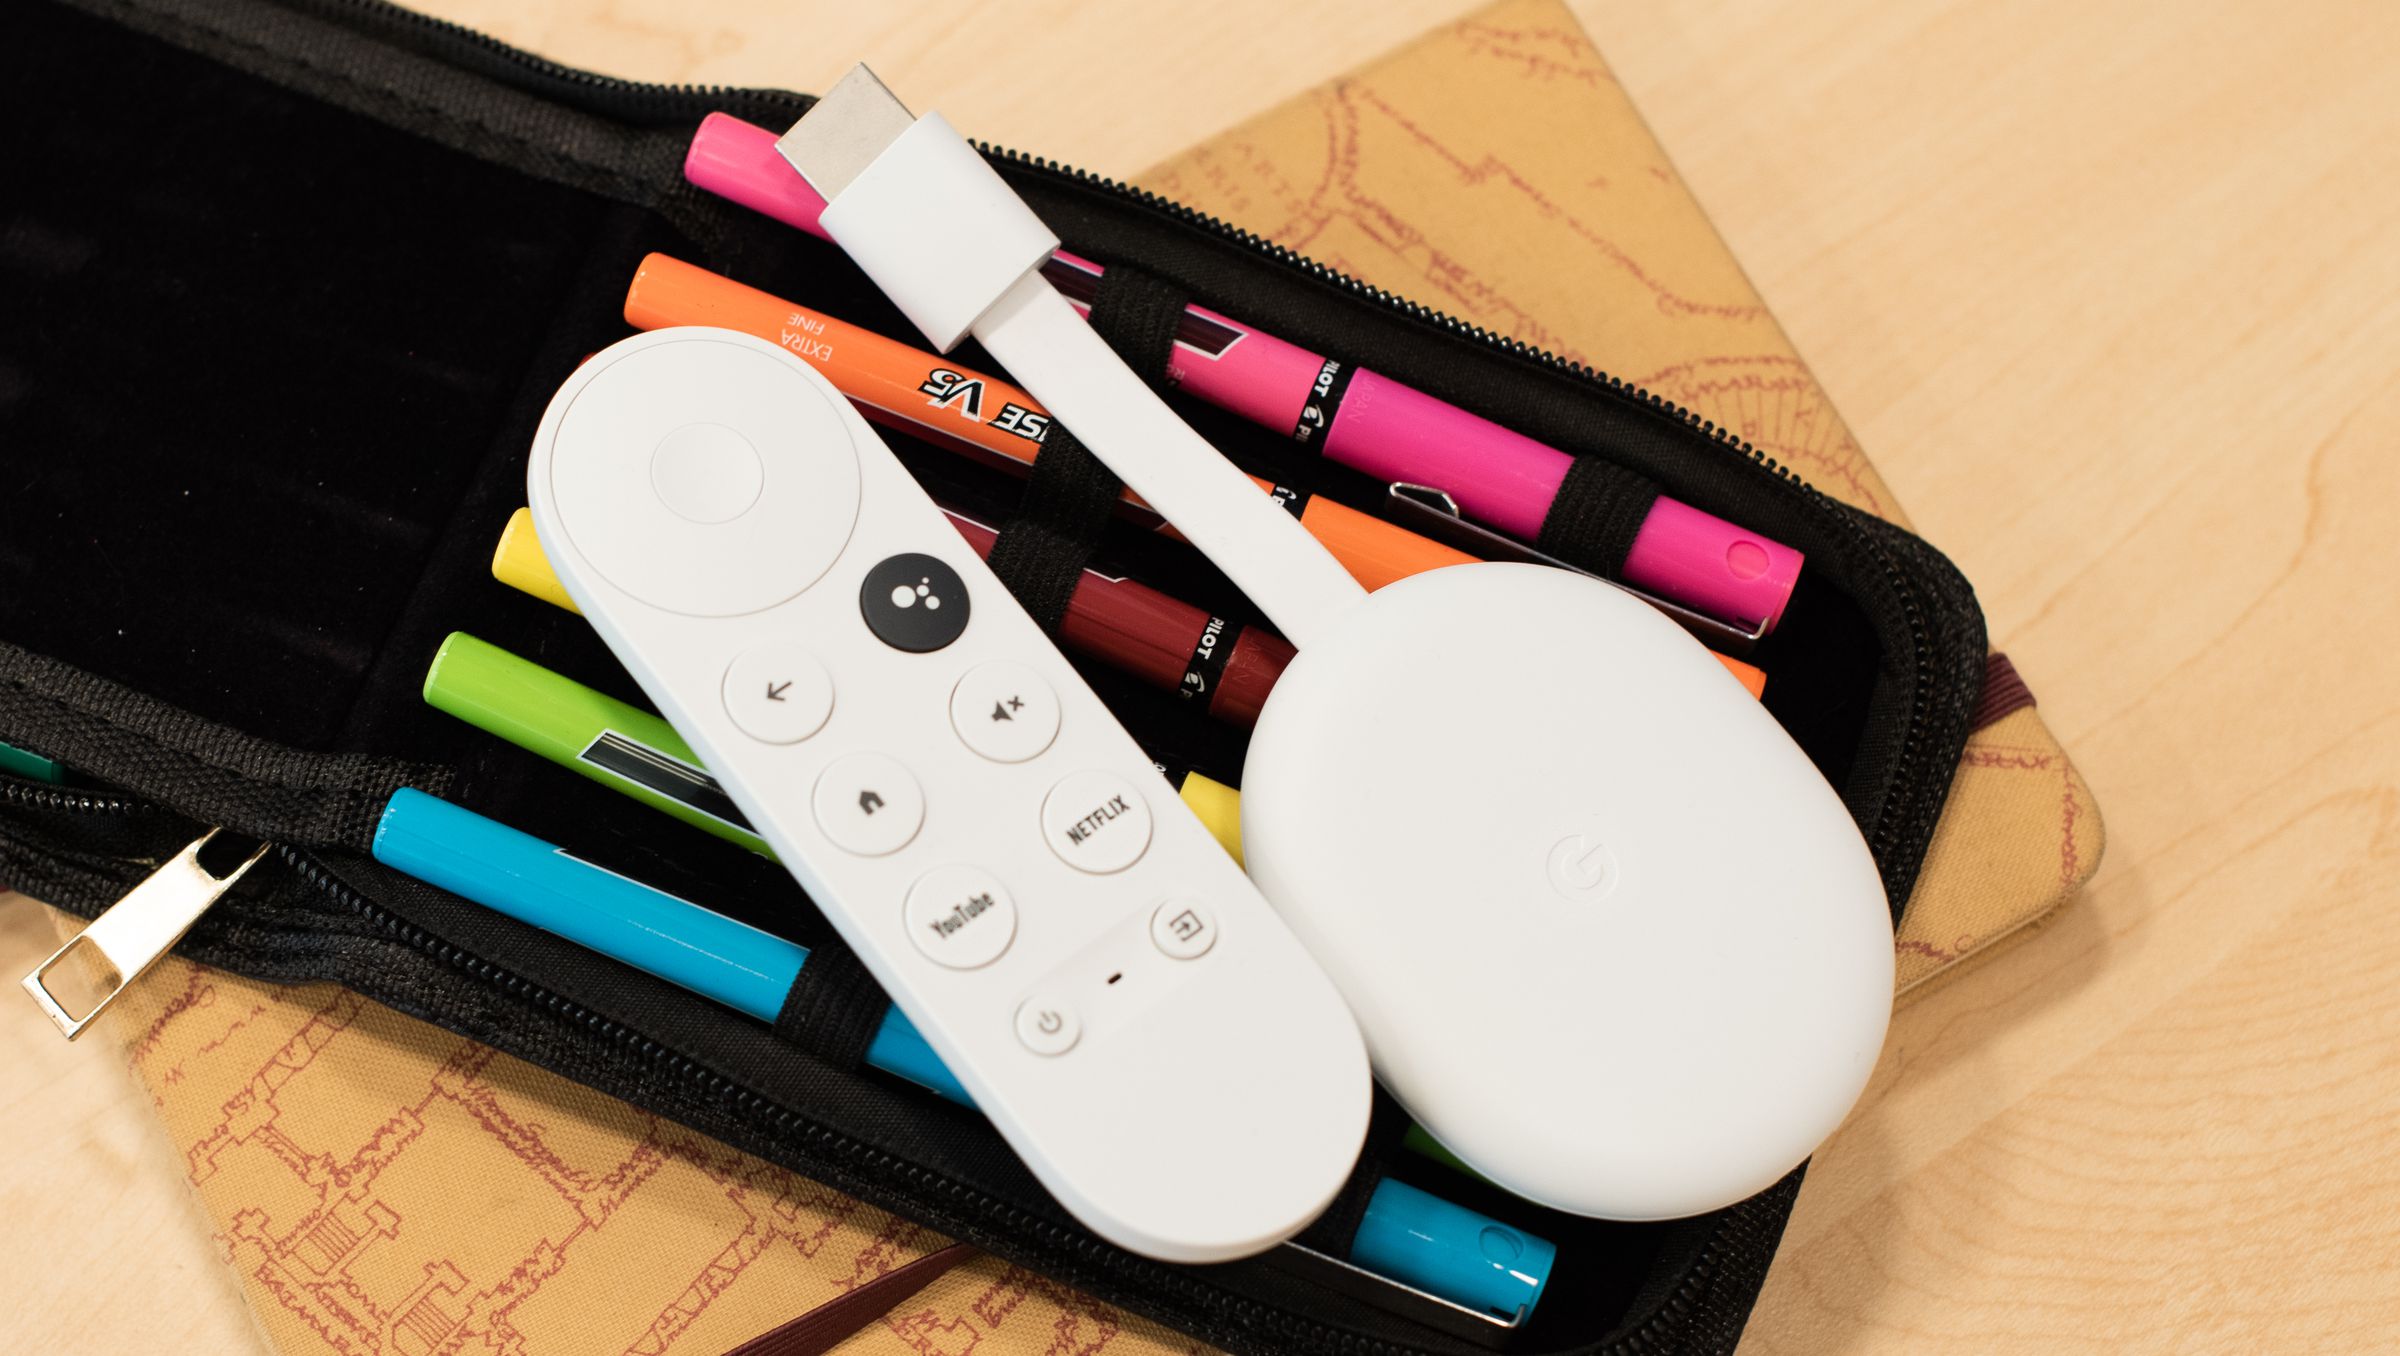 Image of a Chromecast with Google TV sitting on a bag of pens. It’s a white, oval-shaped device, with an HDMI cable sticking out from the front.